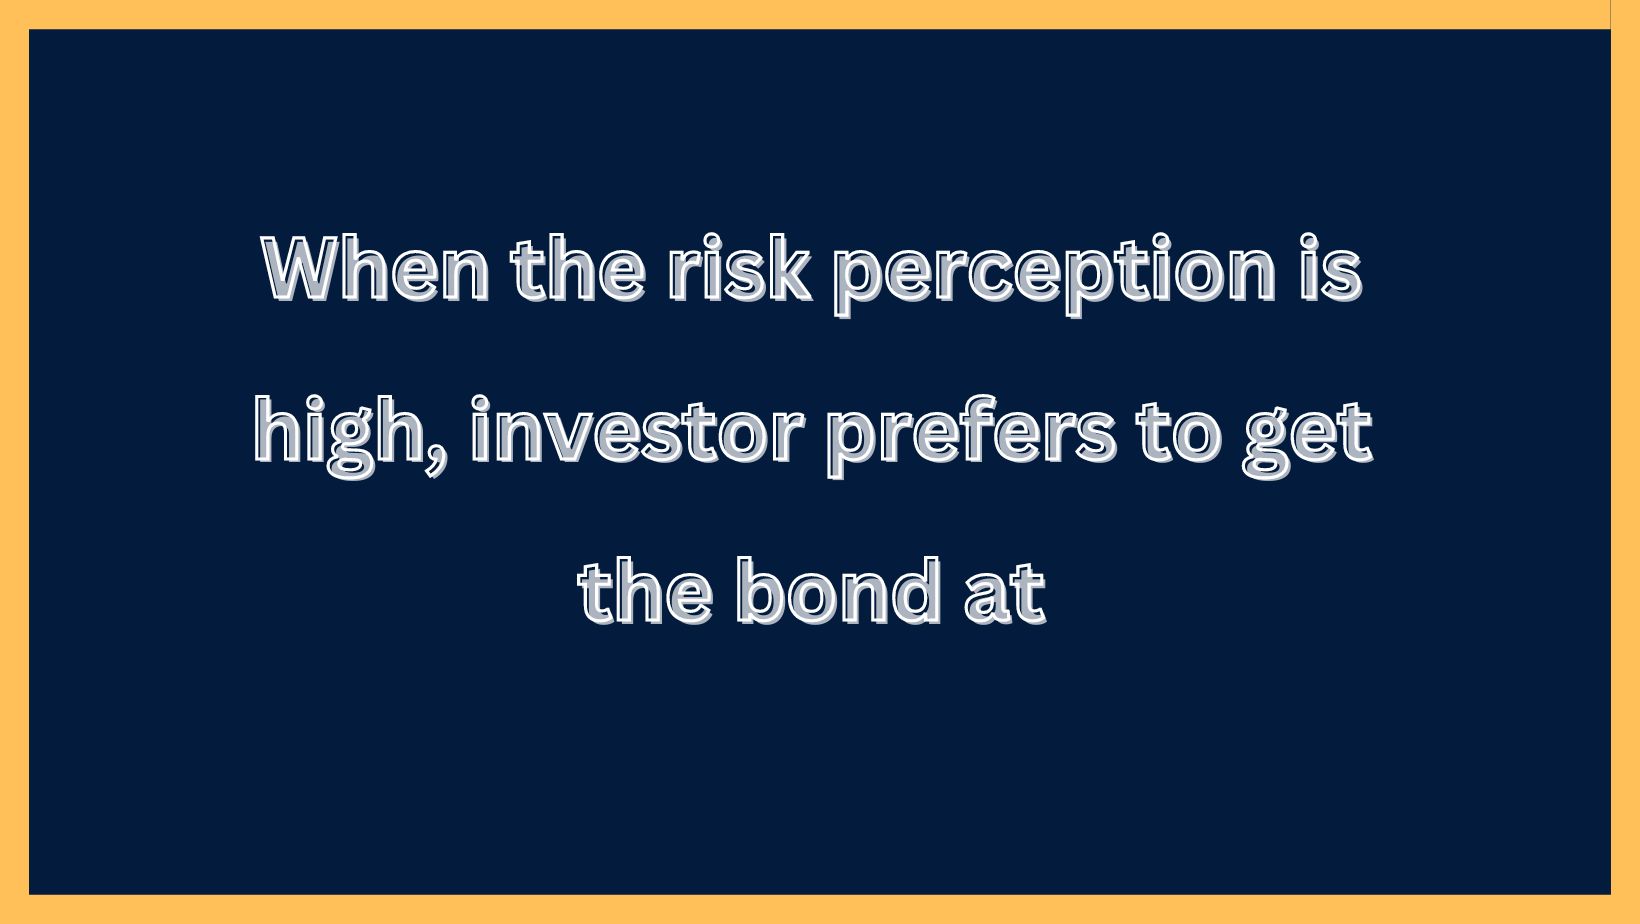 When the risk perception is high, investor prefers to get the bond at